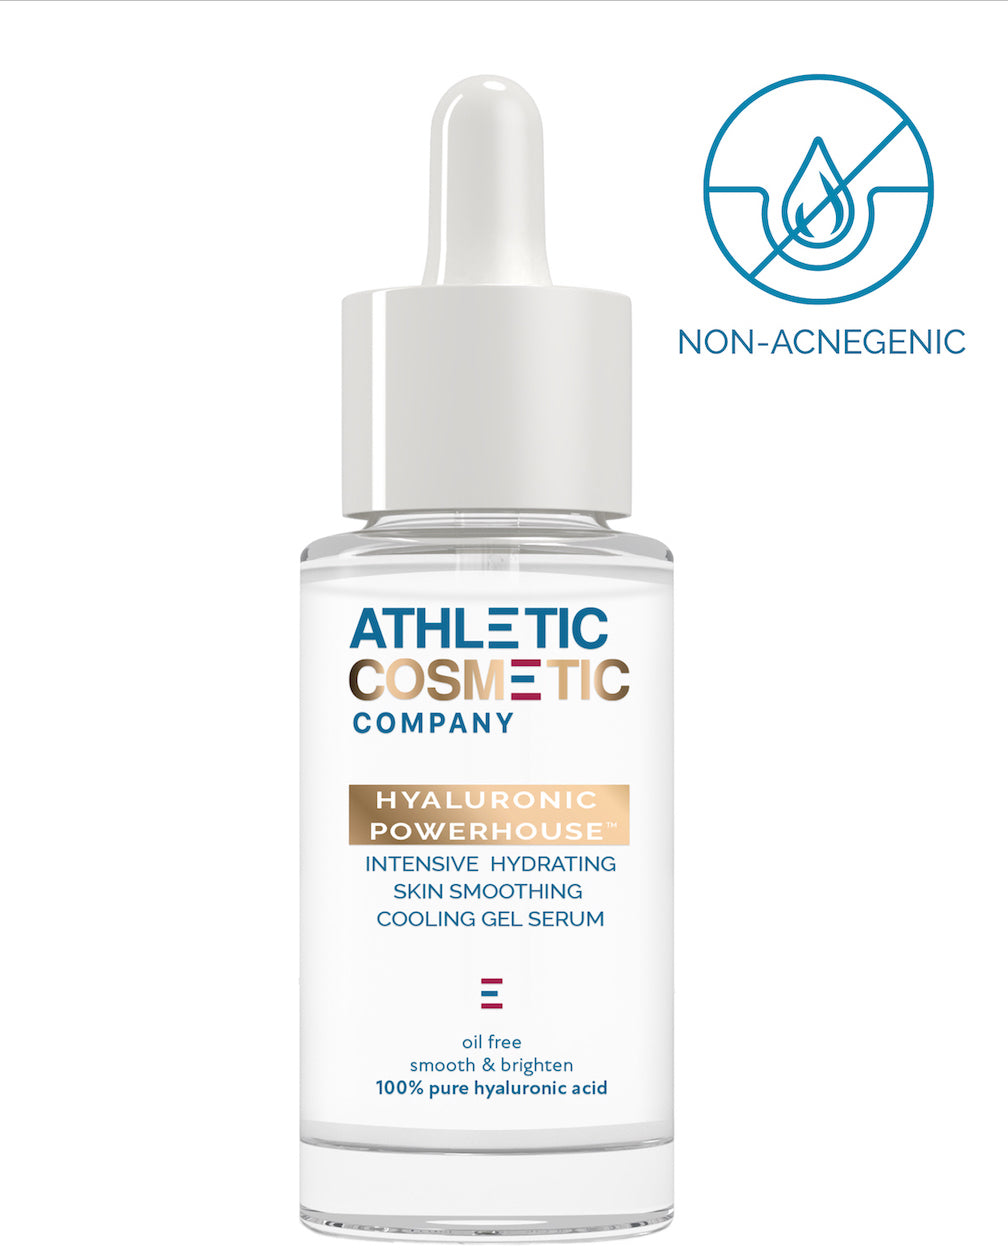 ATHLETIC COSMETIC COMPANY. HYALURONIC POWERHOUSE. INTENSIVE HYDRATING SKIN SMOOTHING COOLING GEL SERUM. Oil free, smooth &amp; brighten, 100% Pure Hyaluronic Acid. NON_ACNEGENIC